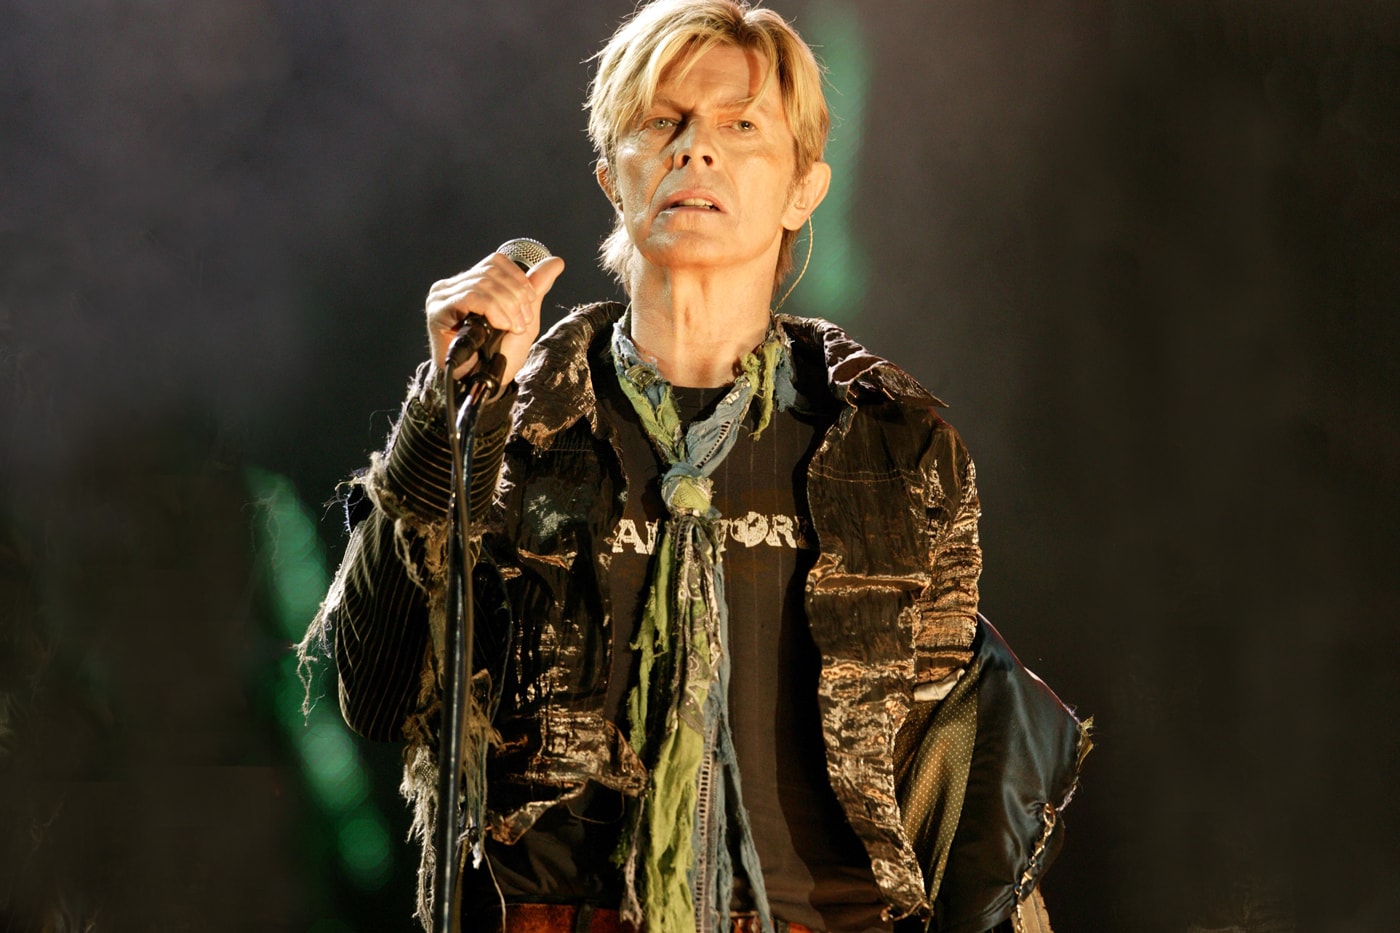 David Bowie's Final Album To Be Made Into Video Series For Instagram